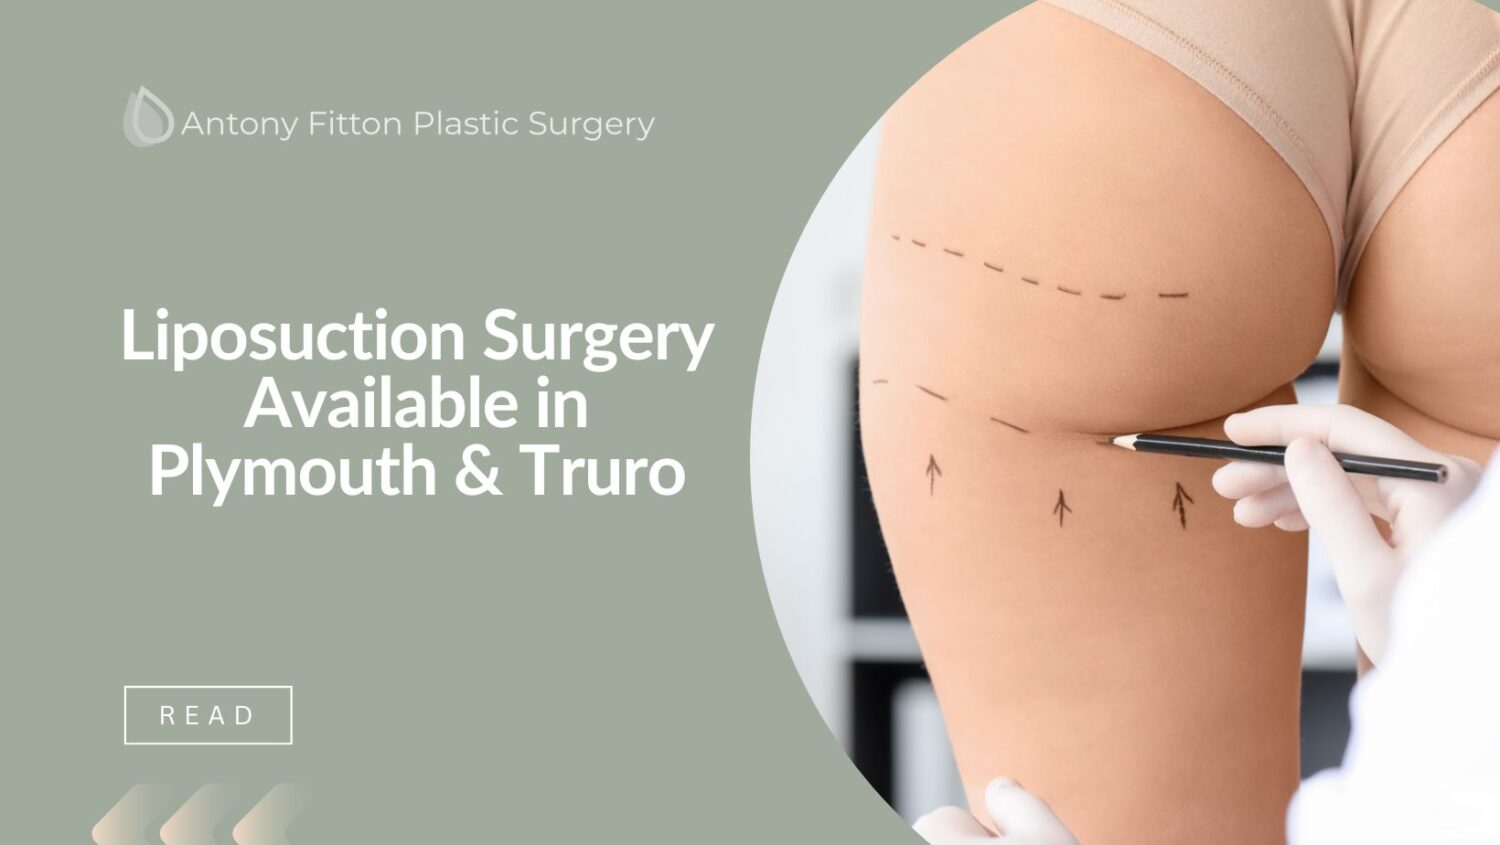 Liposuction Surgery Available in Plymouth & Truro